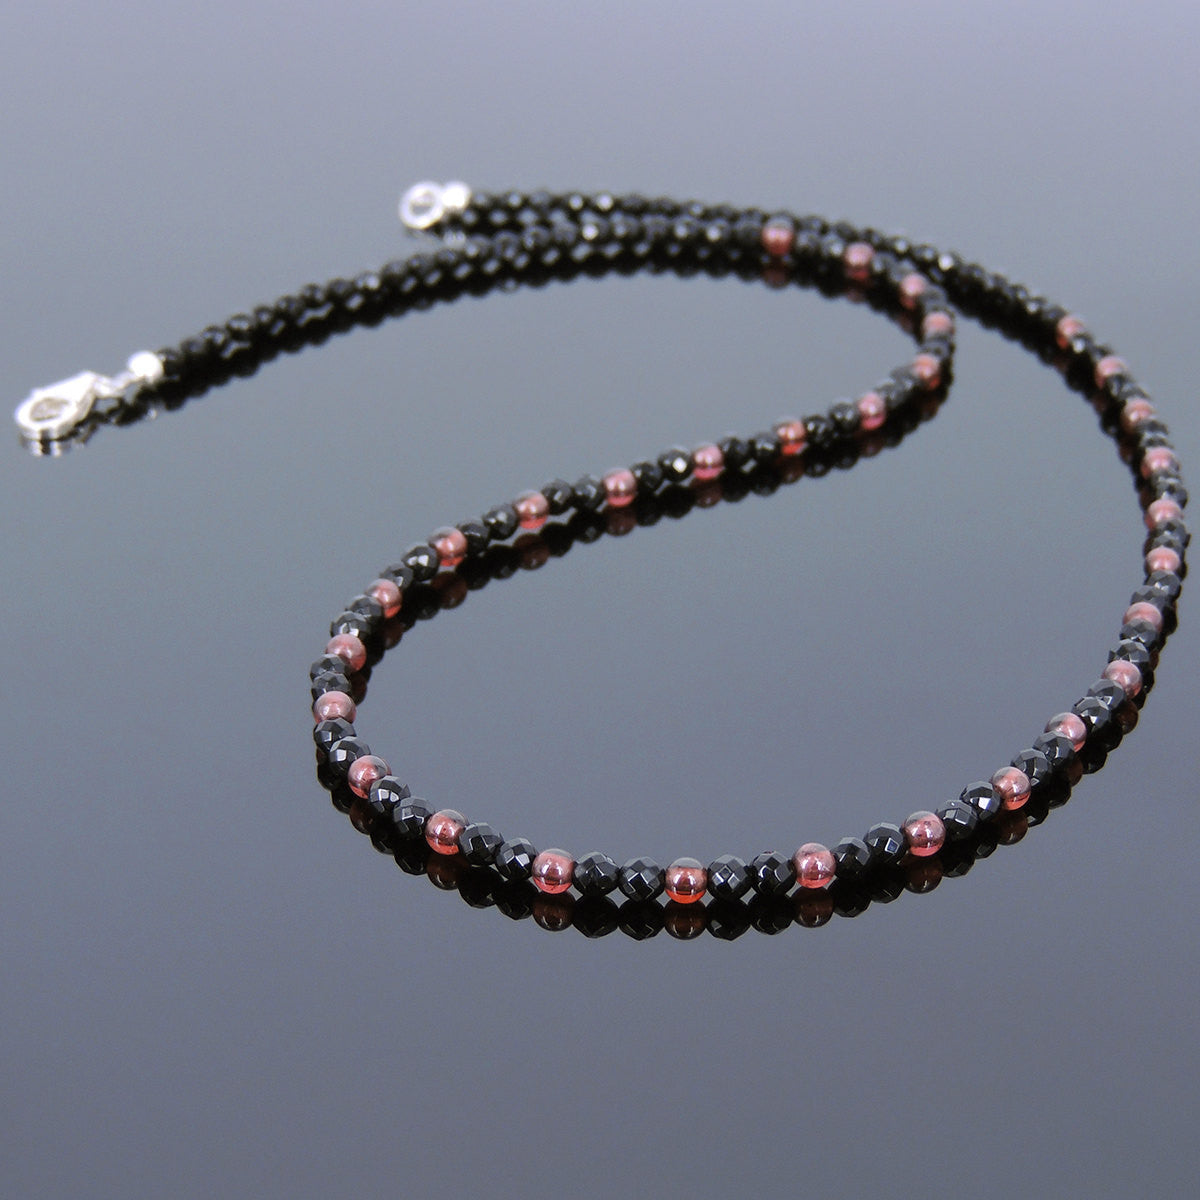 Grade AAAA Natural Garnet & Faceted Black Onyx Healing Gemstone Necklace with S925 Sterling Silver Spacer Beads & Clasp - Handmade by Gem & Silver NK119